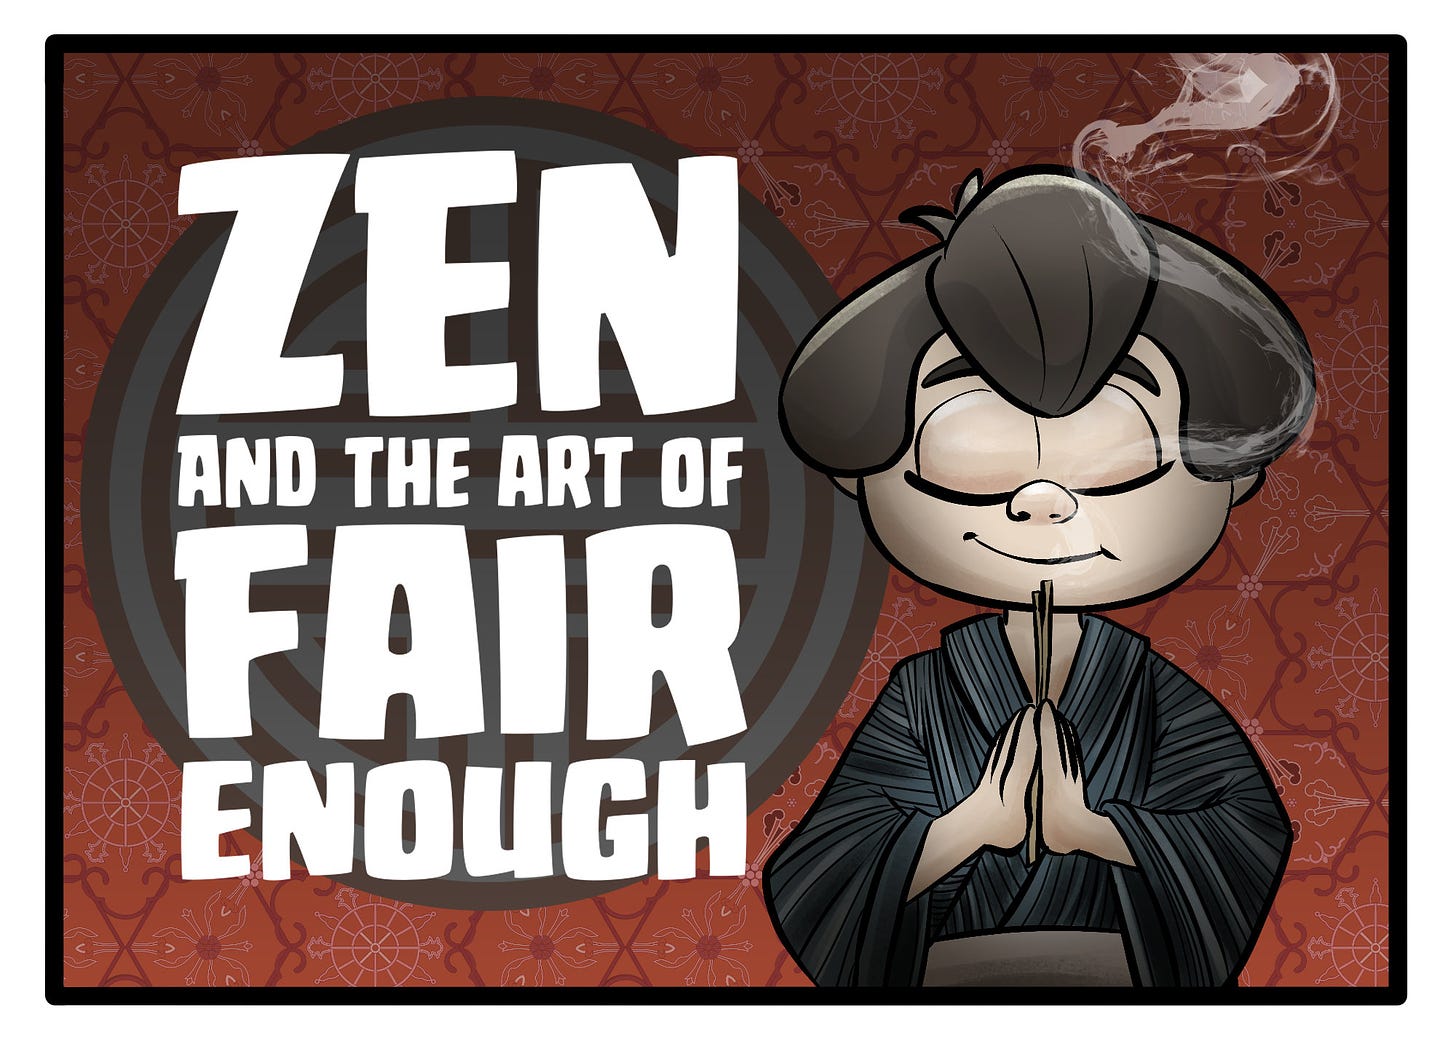 Title: Zen and the art of fair enough, with Daniel wearing a yukata (Japanese ceremonial robe)